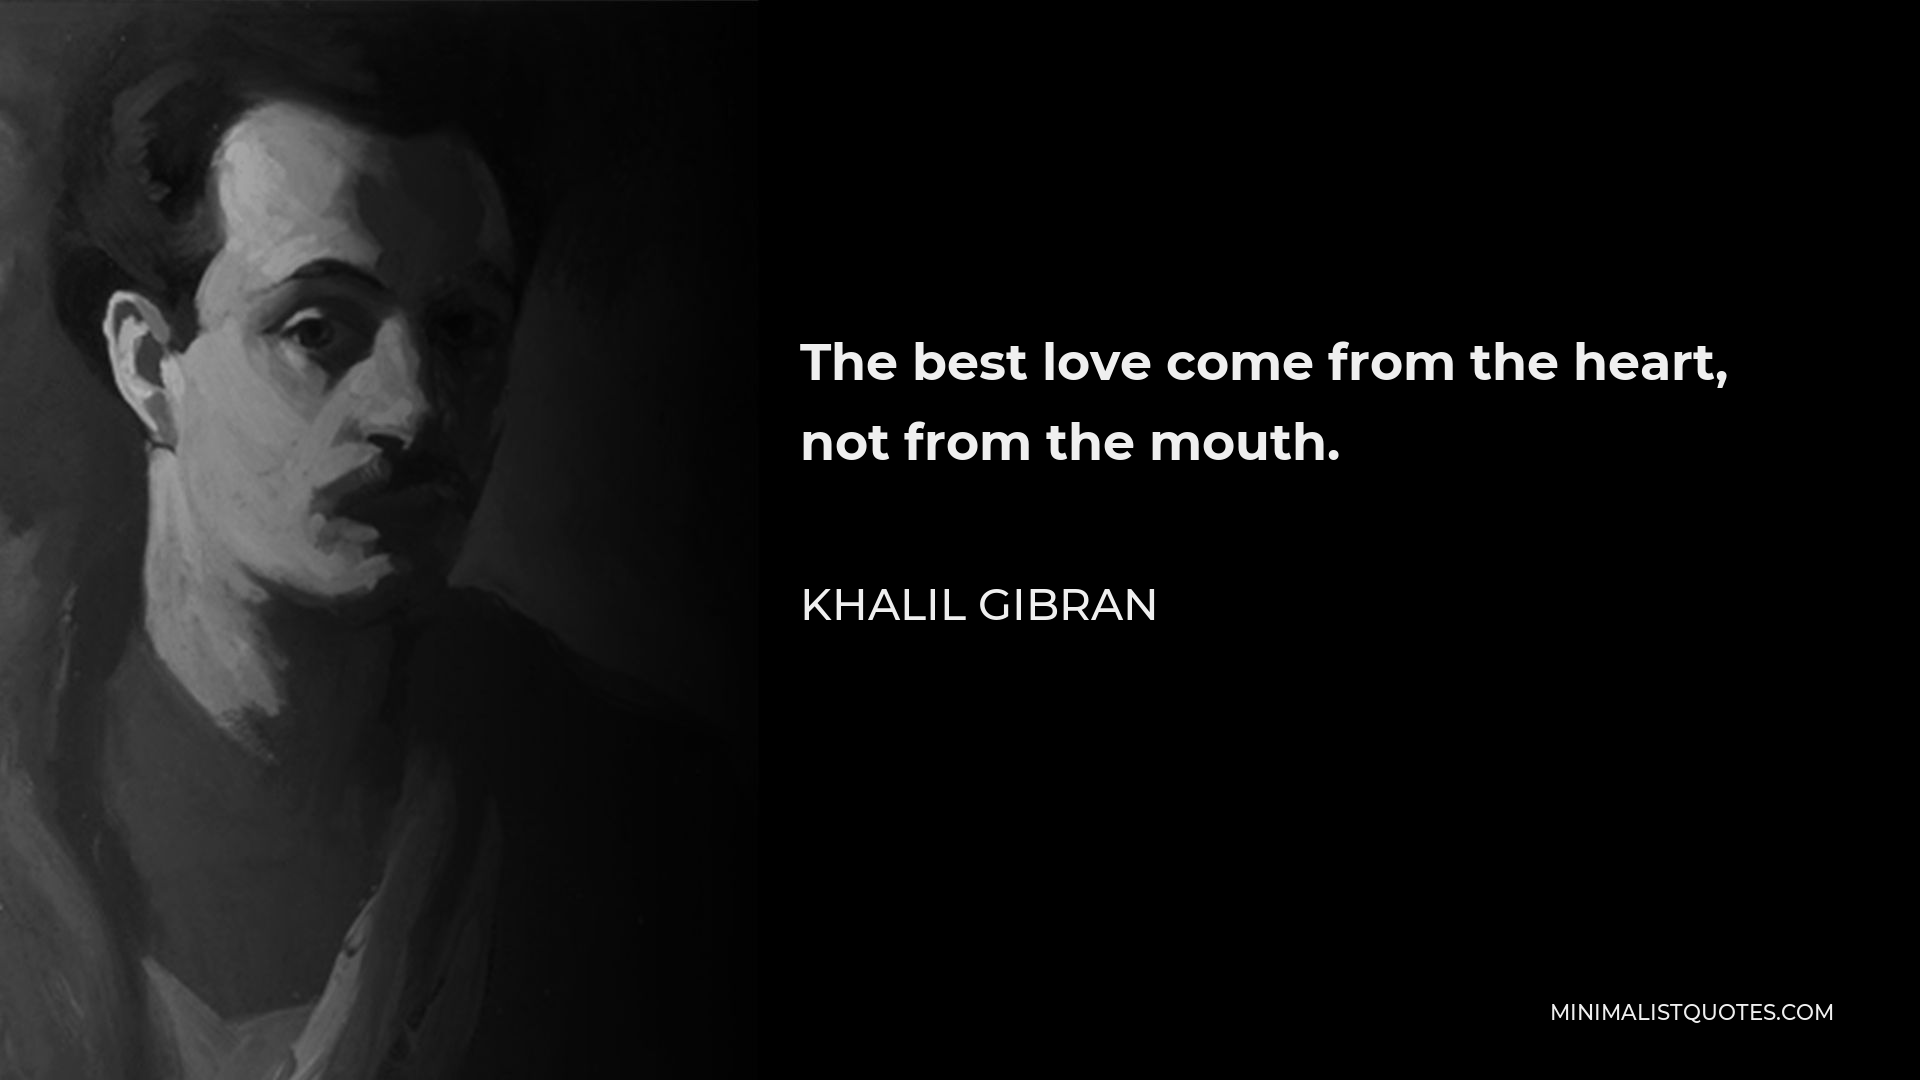 Khalil Gibran Quote - The best love come from the heart, not from the mouth.